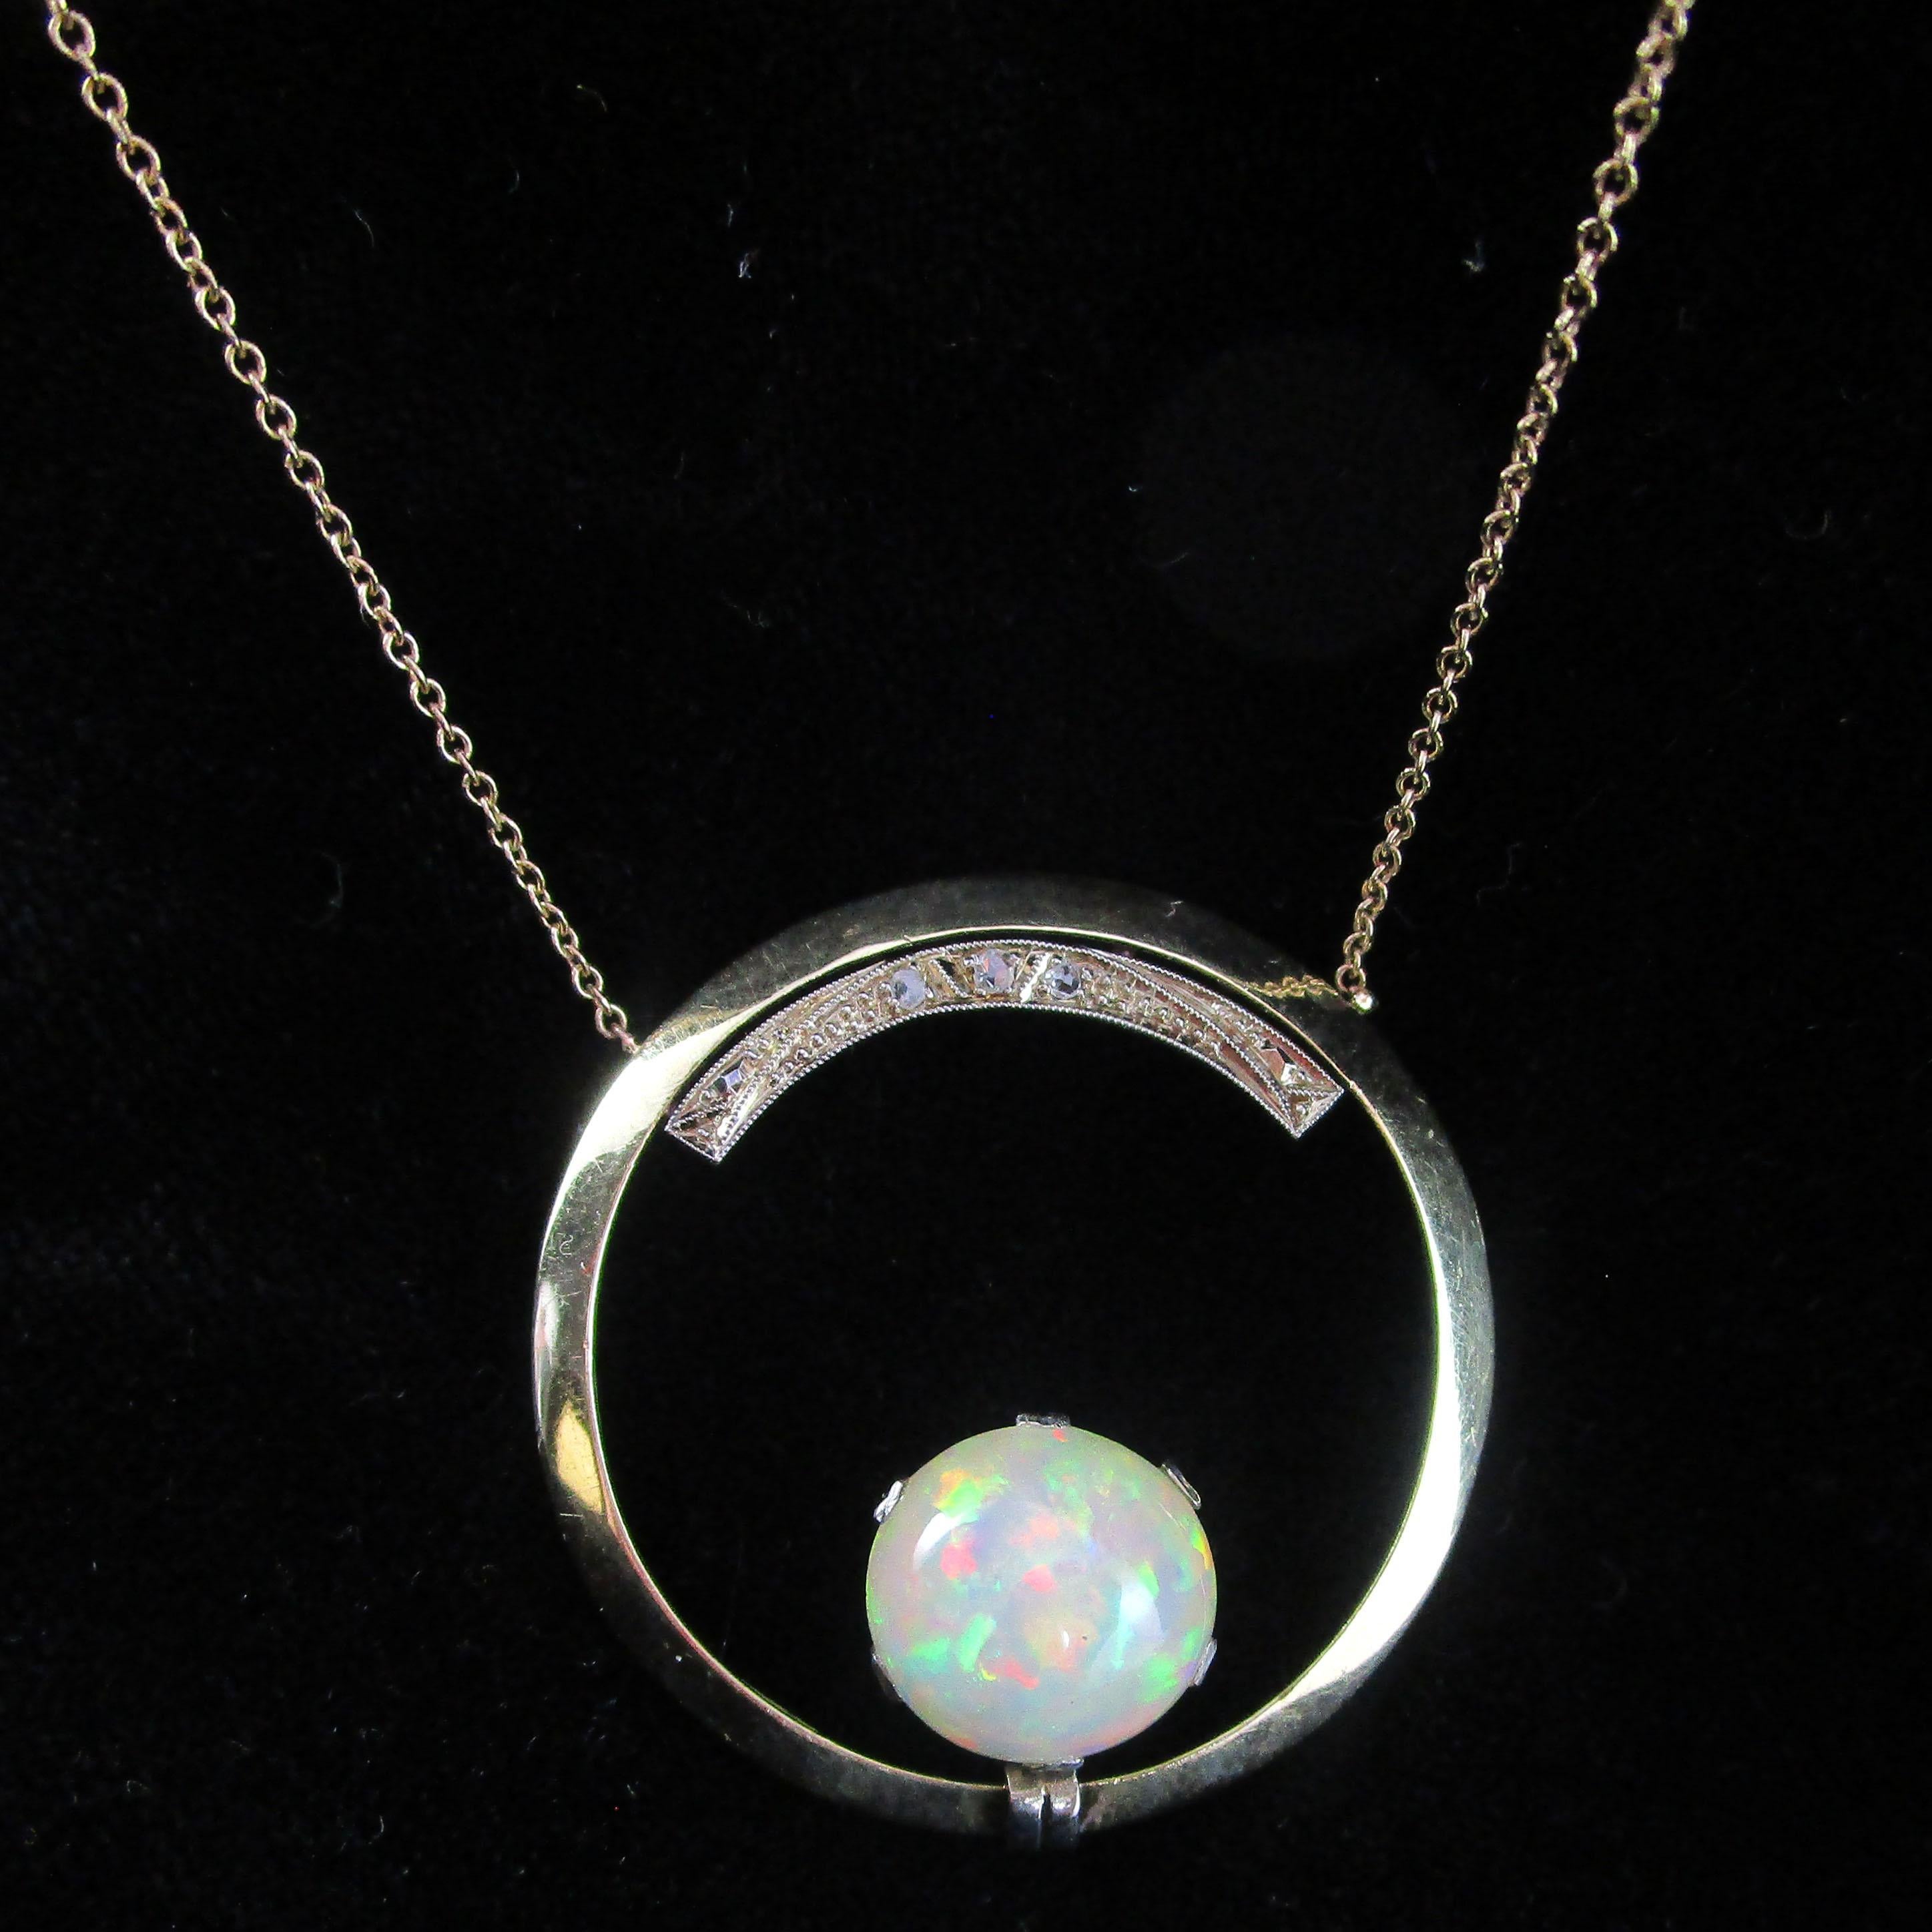 1925 Art Deco 14k Yellow Gold Diamond and Opal Circle Necklace For Sale 5